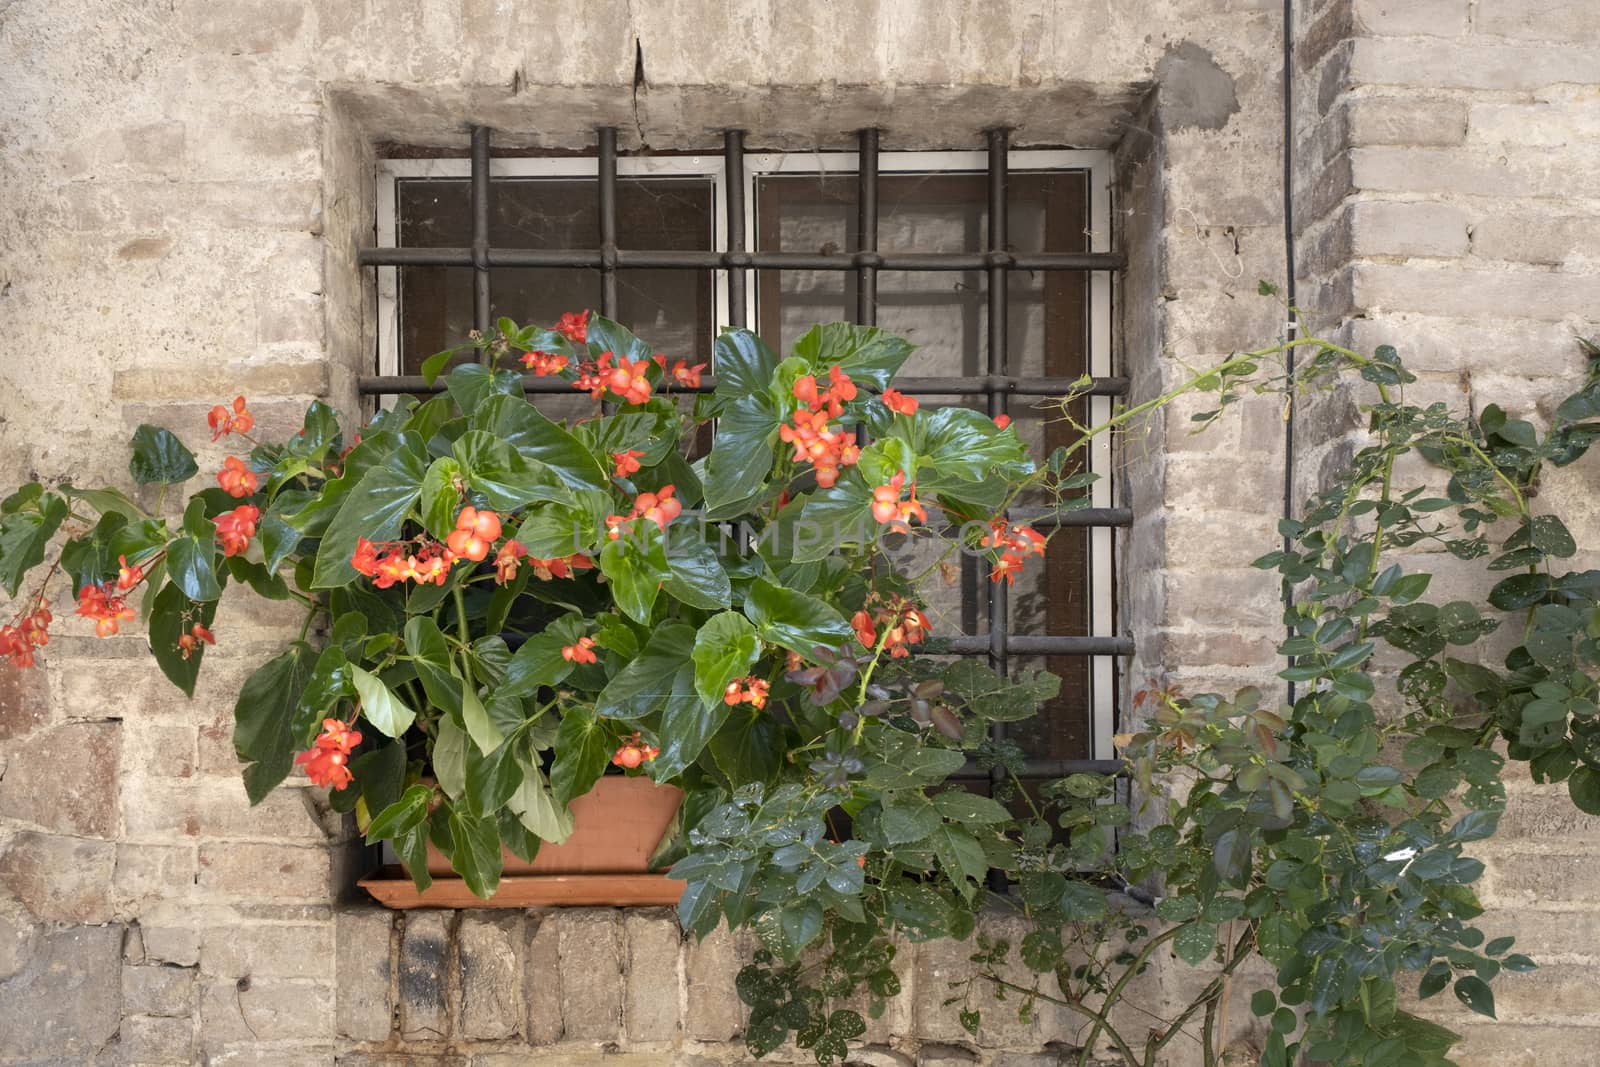 A basket of bright pink and red flowers hangs on the window of a home in an ancient building in Italy by Tjeerdkruse